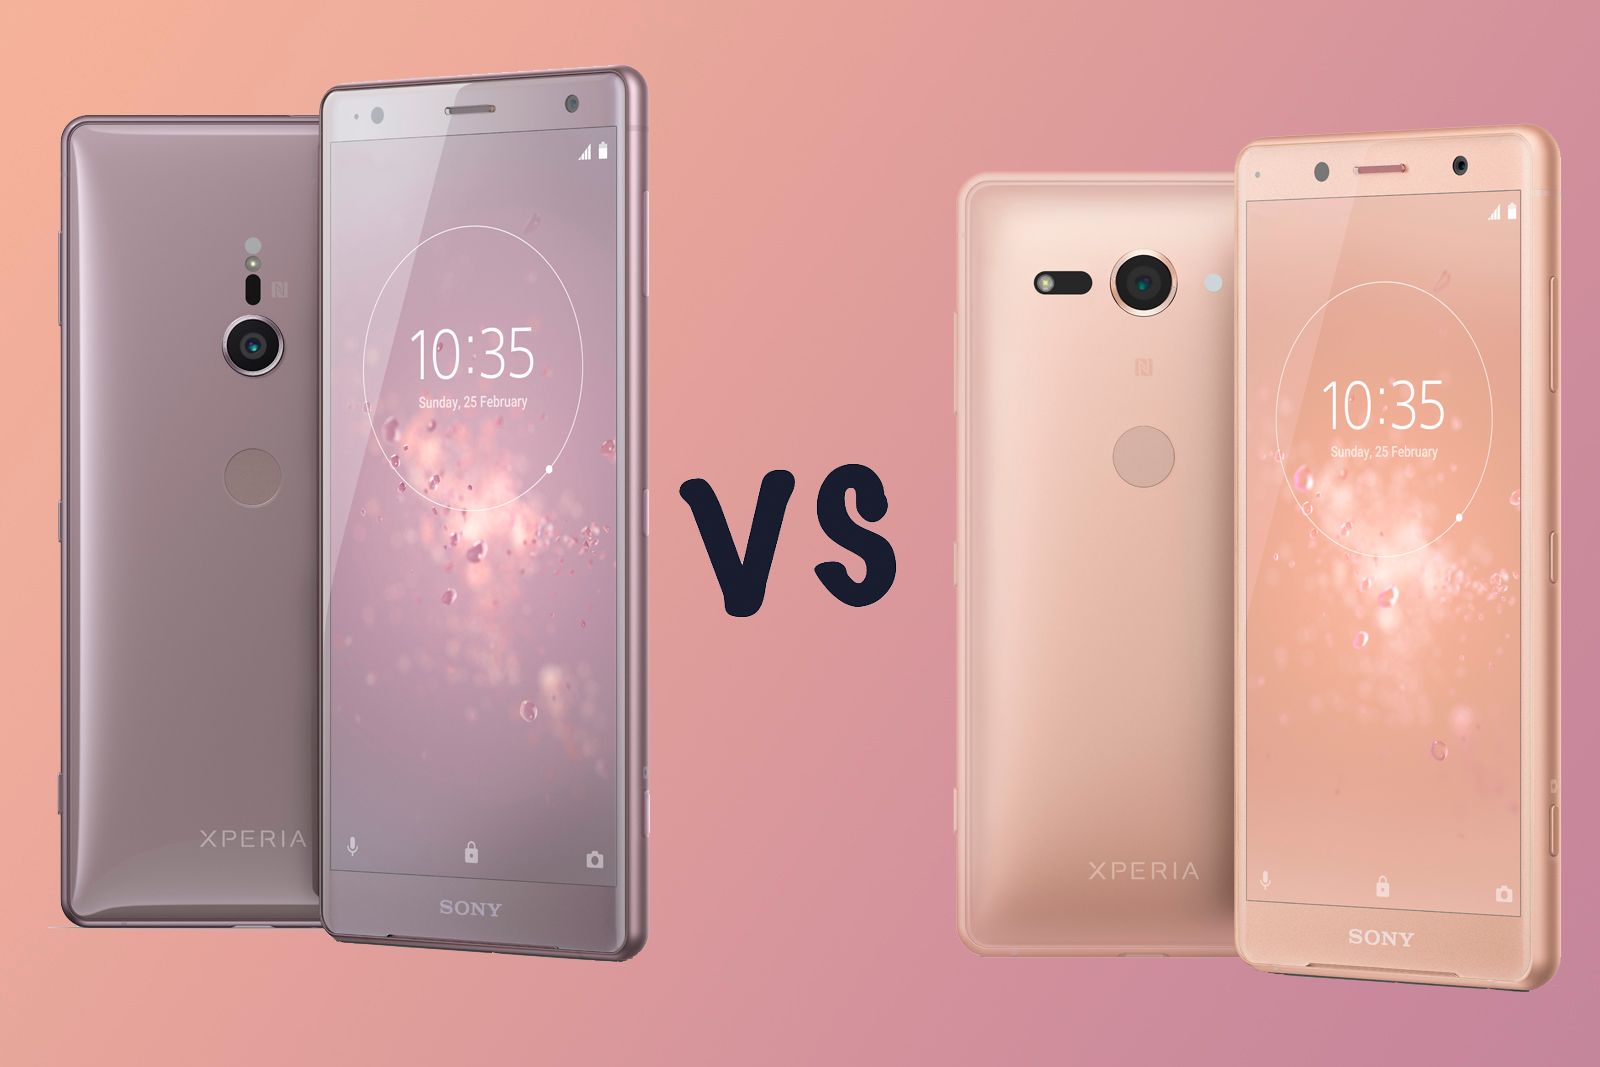 Sony Xperia XZ2 vs Xperia XZ2 Compact Whats the difference image 1